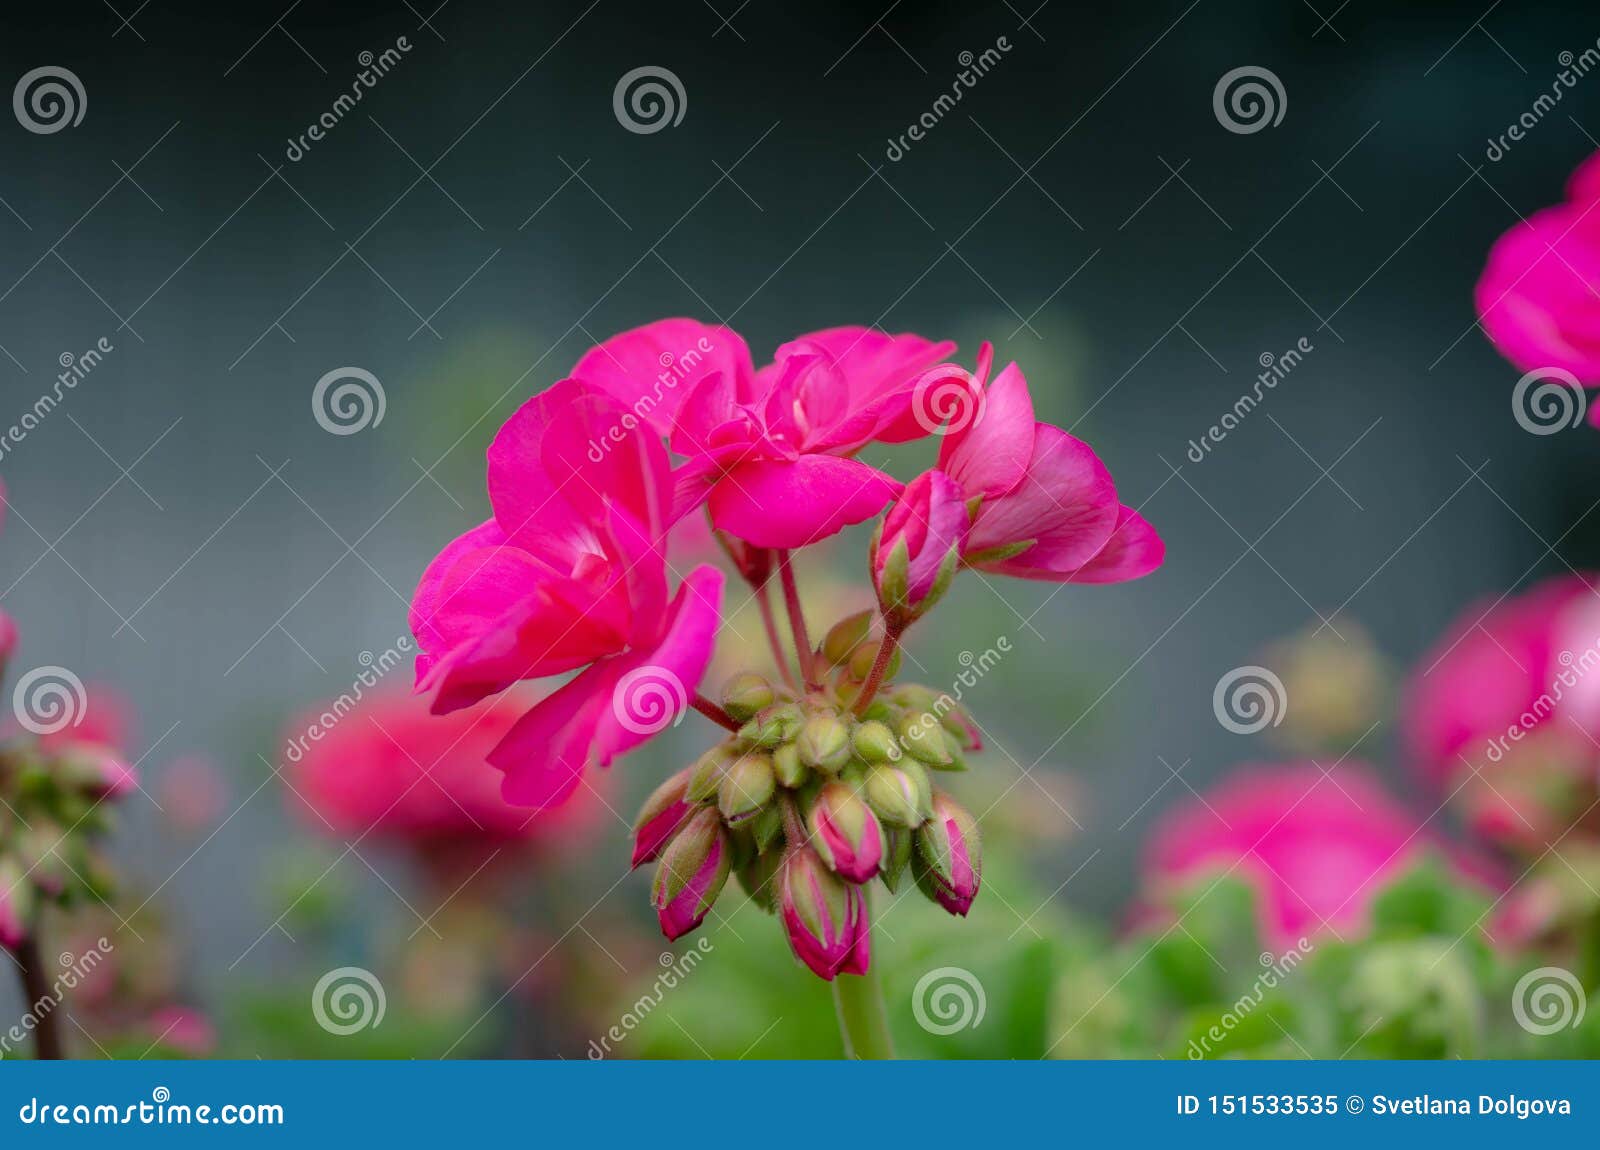 Beautiful Pink Flowers in the Spring Summer Garden Stock Image - Image ...